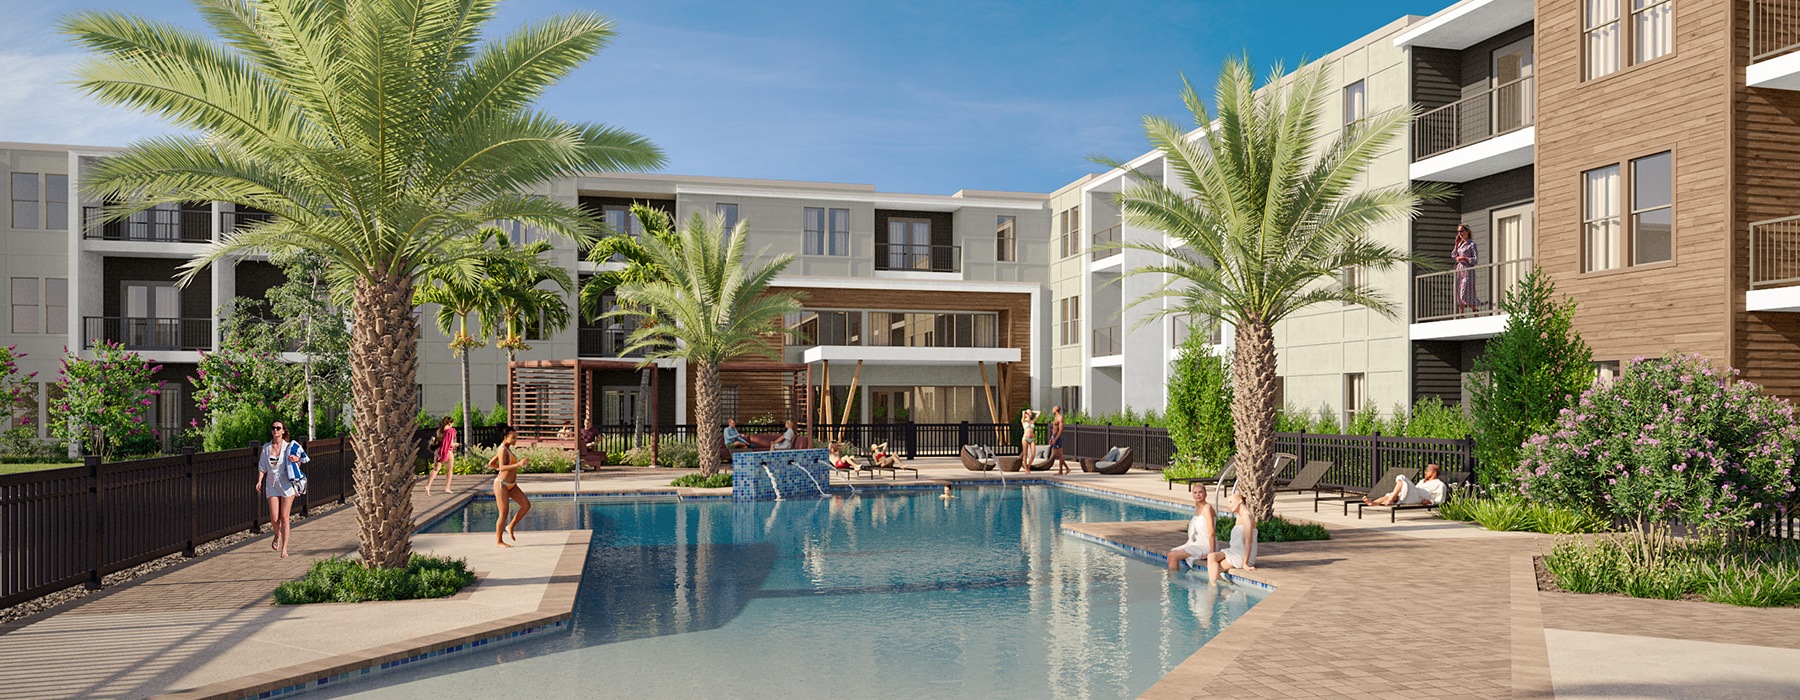 rendering of pool showing tropical landscaping views, ample space, and reclining seating 